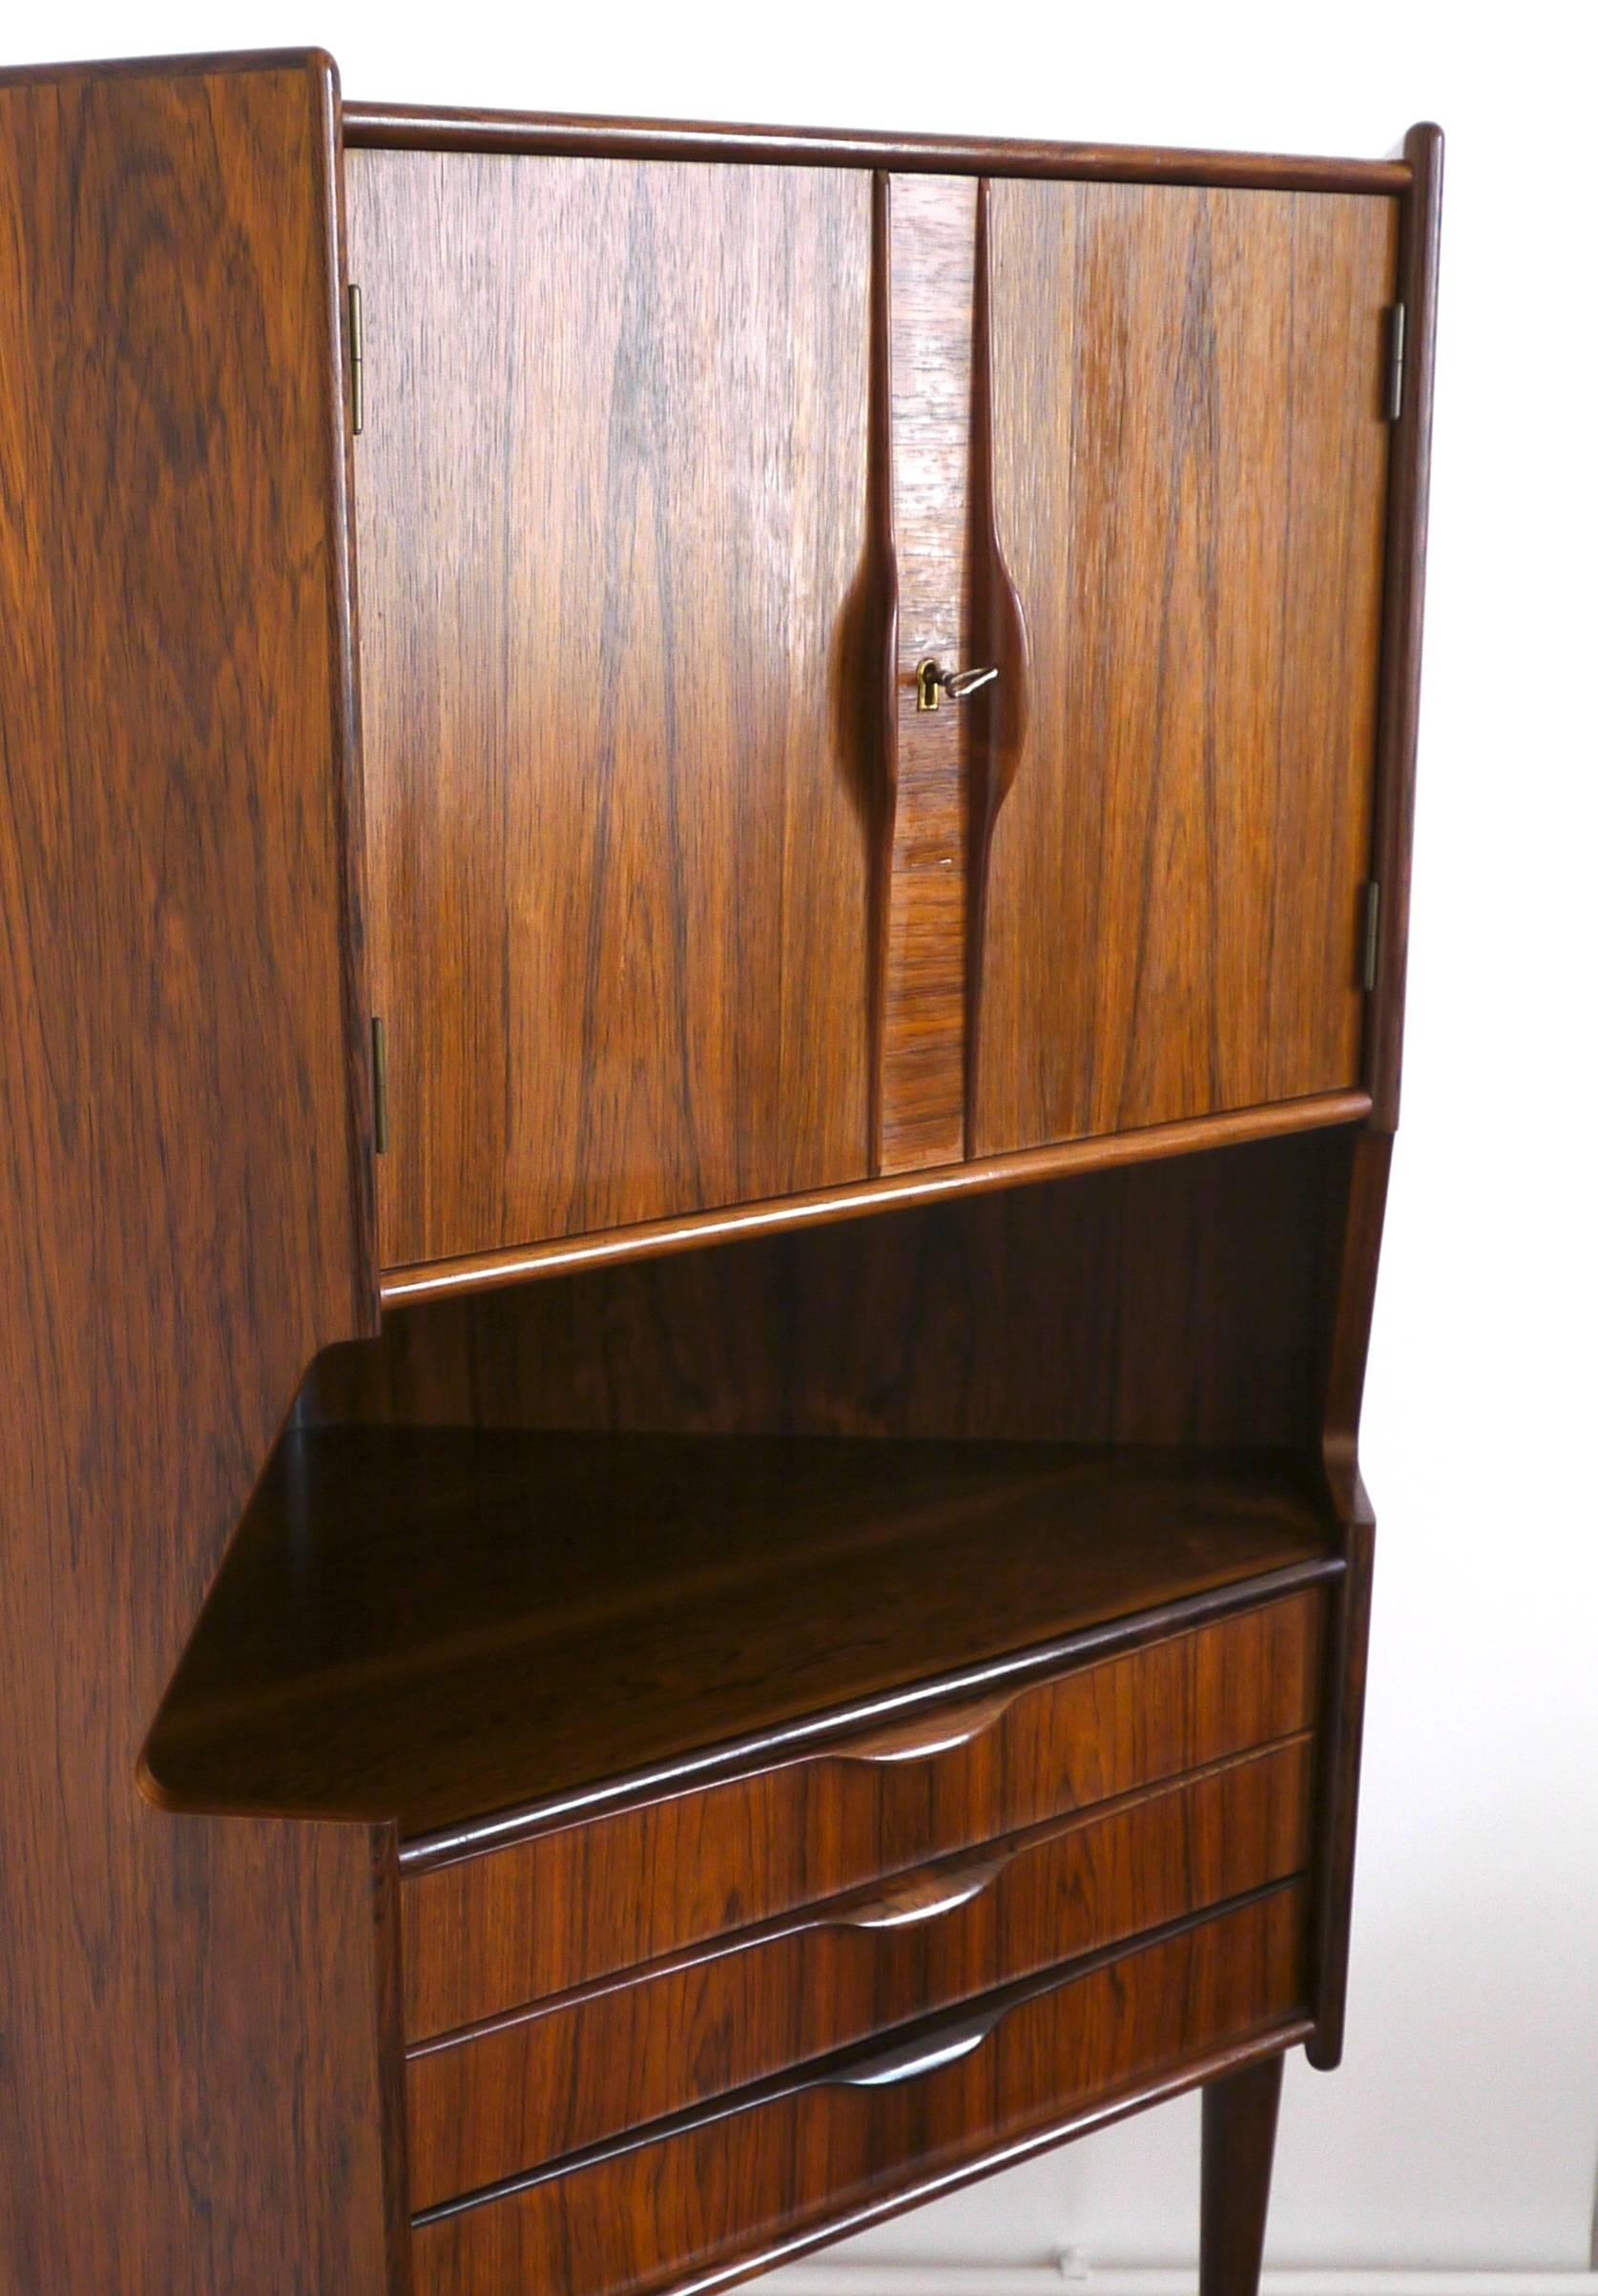 This corner highboard features a cocktail bar, two doors and three drawers. It is made of veneered Rio Palisander and shows a shiny lacquered finish with an amazing wood grain. A very stylish and elegant look! The legs and handles are solid wood.